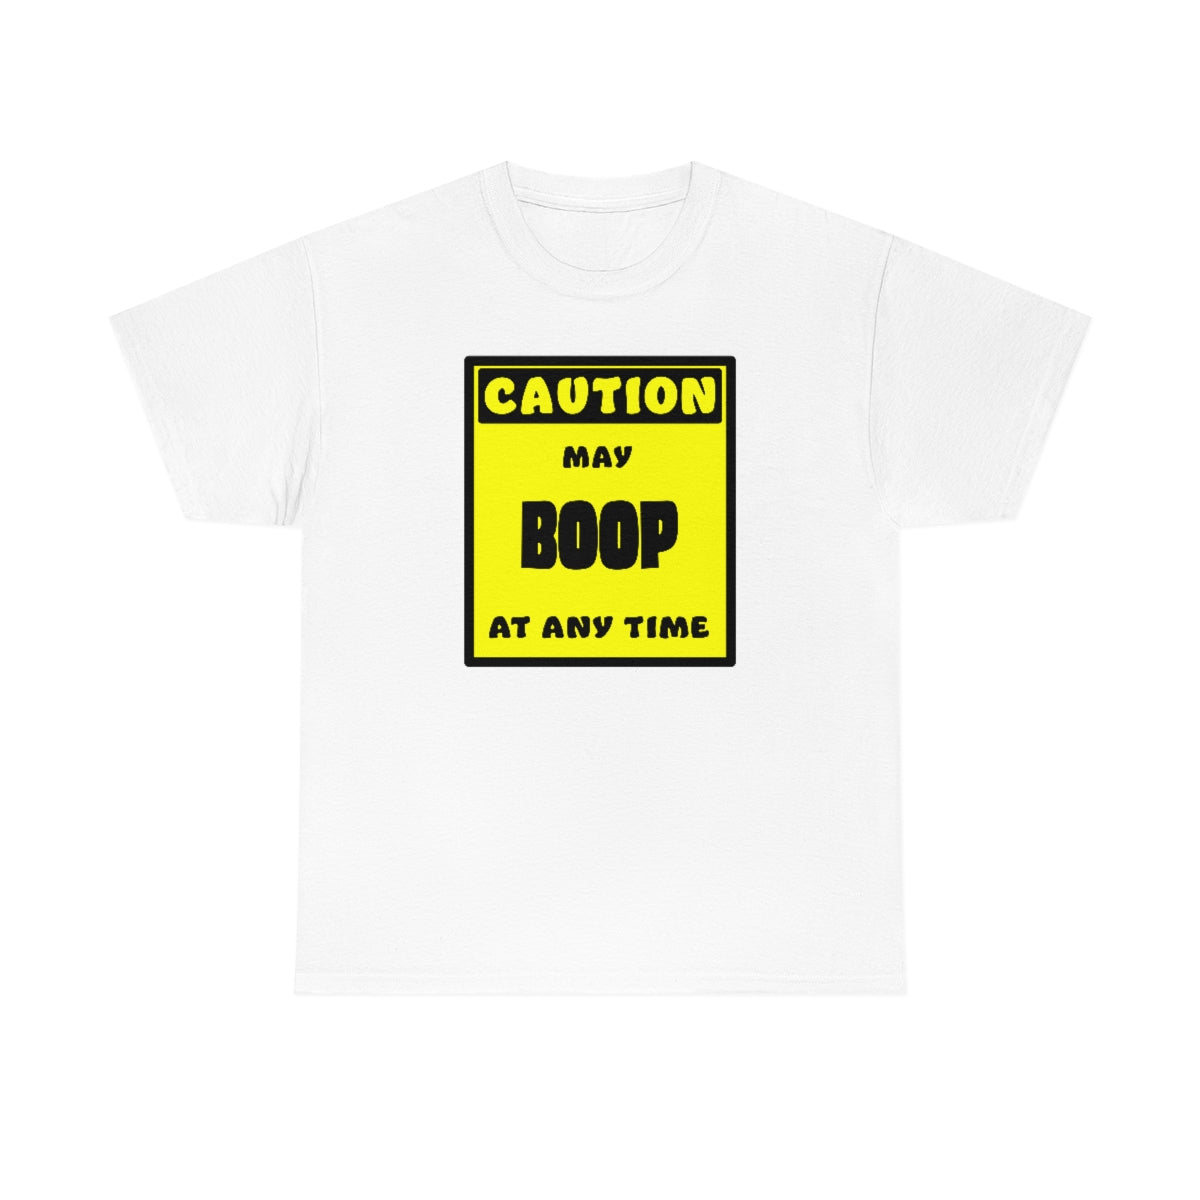 CAUTION! May BOOP at any time! - T-Shirt T-Shirt AFLT-Whootorca White S 